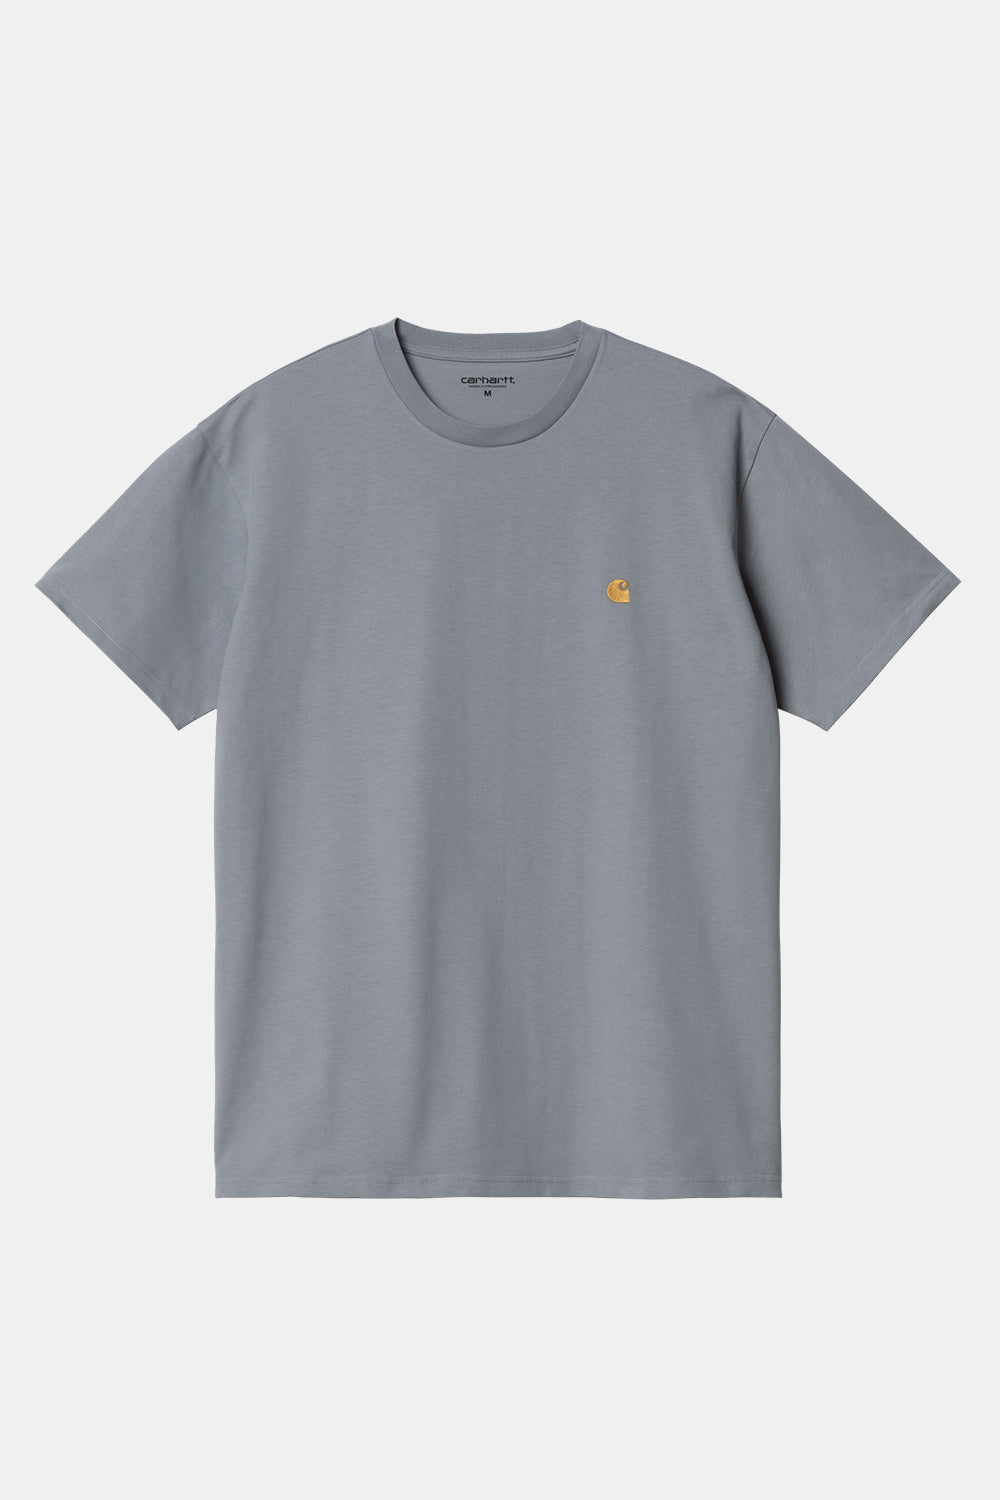 Carhartt WIP Short Sleeve Chase T-Shirt (Mirror & Gold) | Number Six